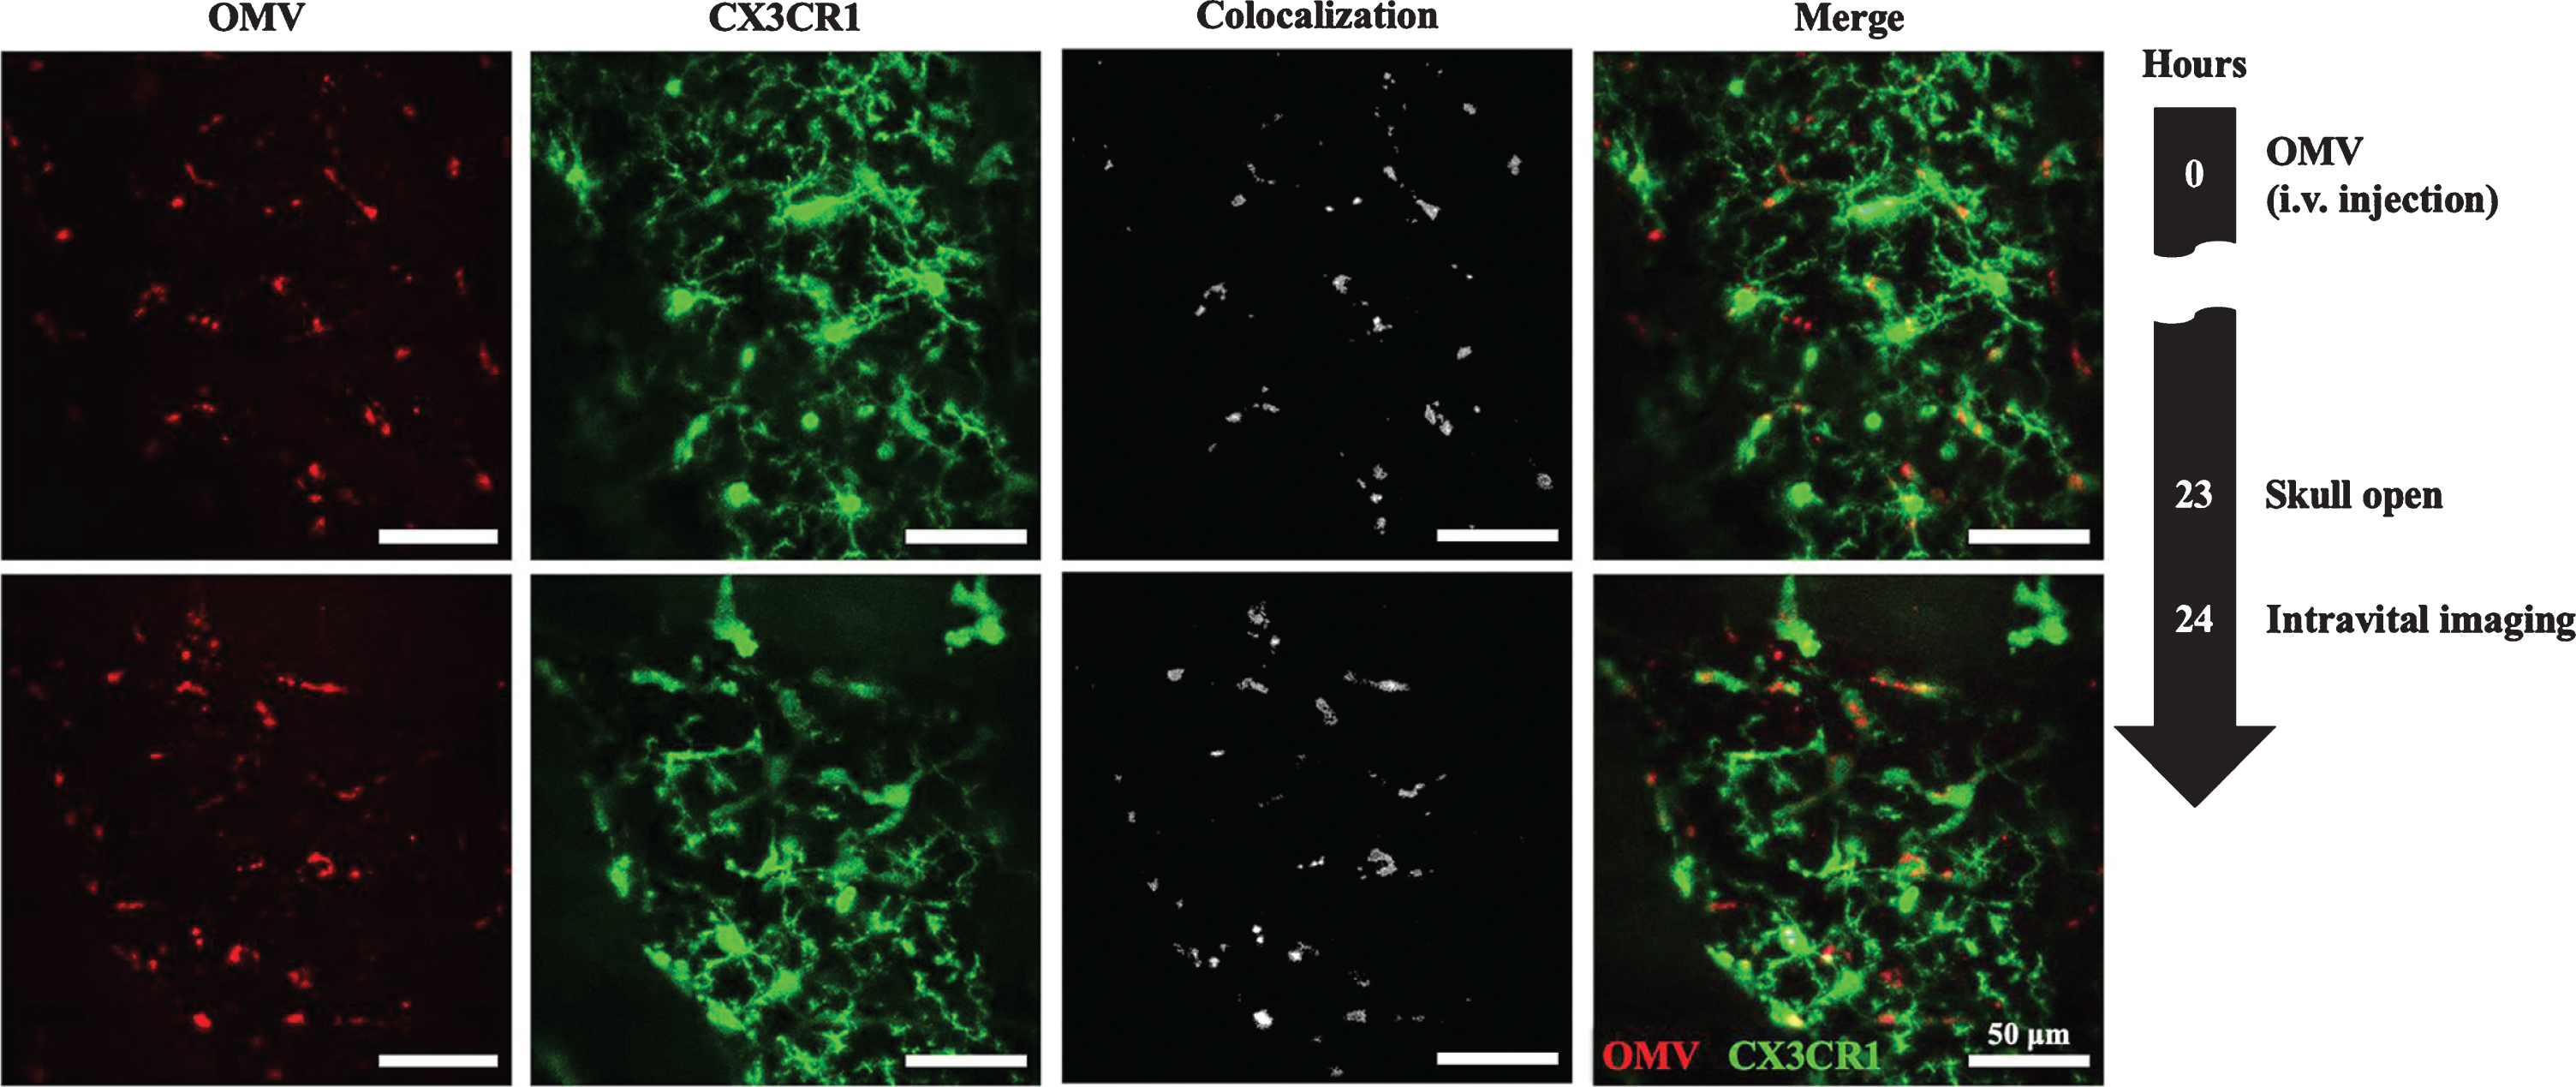 Delivery of Aa OMVs into microglial cells. Intravital image was captured 24 h after Aa OMV i.v. injection. OMVs were colocalized with GFP-positive microglial cells. Scale bar: 50μm. Reprinted with permission from Ha JY, Choi SY, Lee JH, Hong SH, Lee HJ (2020) Delivery of periodontopathogenic extracellular vesicles to brain monocytes and microglial IL-6 promotion by RNA Cargo. Front Mol Biosci 7, 596366, under the Creative Commons Attribution License (CC BY).